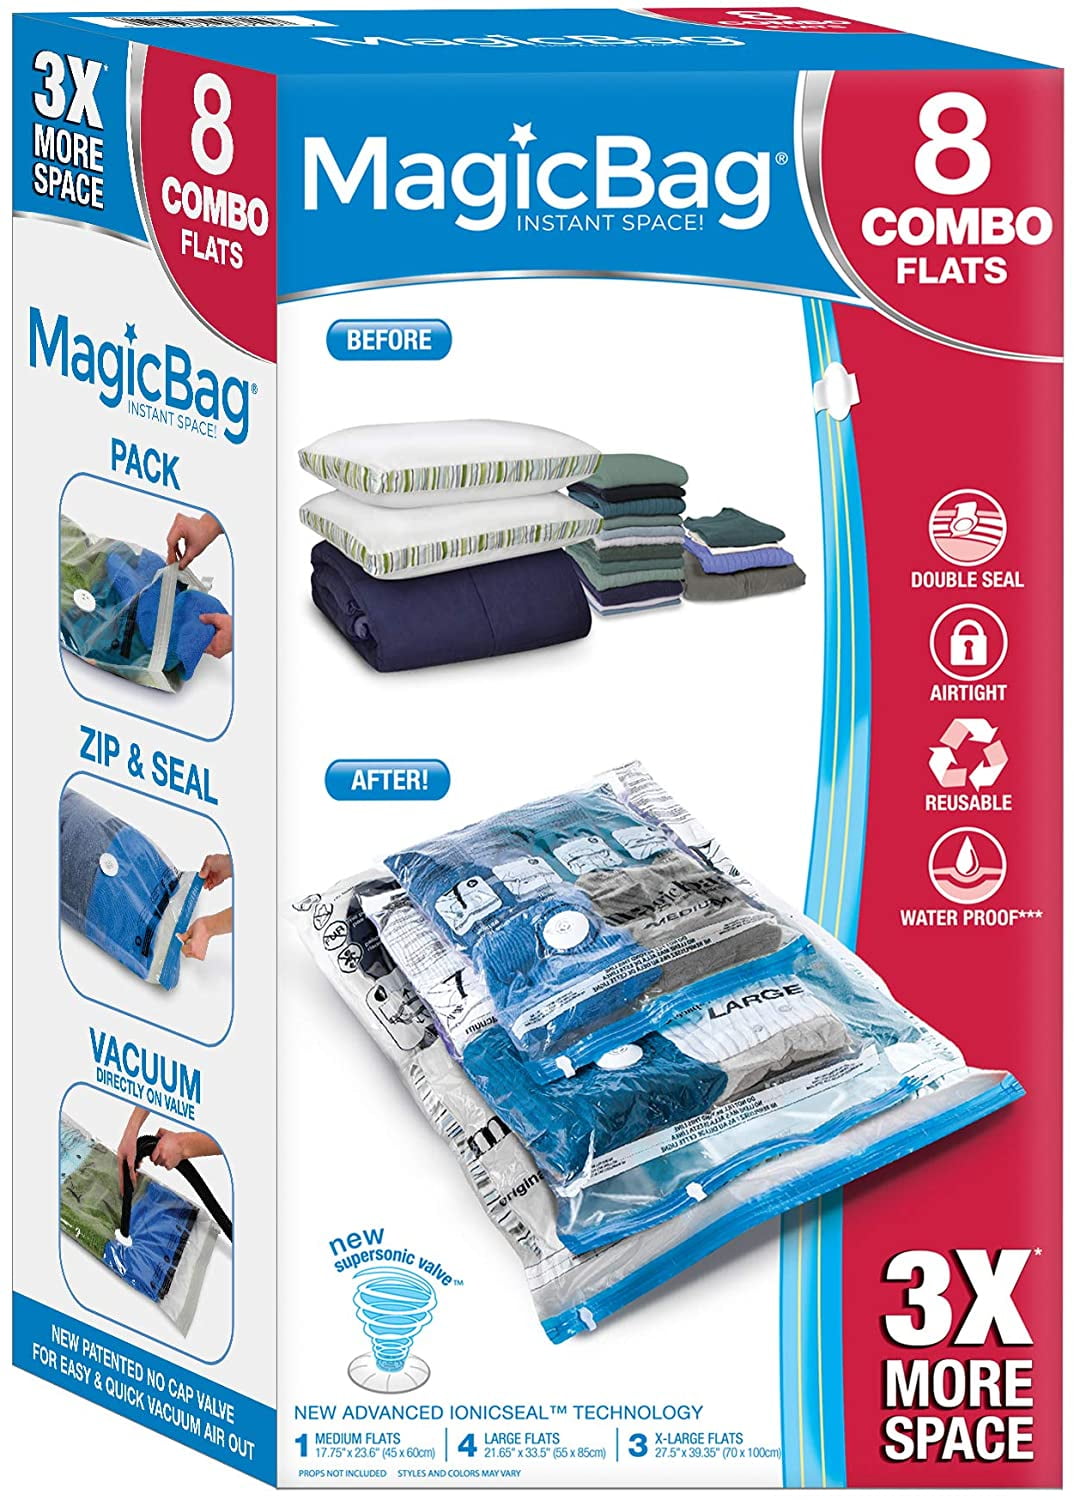 Magicbag Smart Design Instant Space Saver Storage - Combo Flat - Set of 8 Bags Total